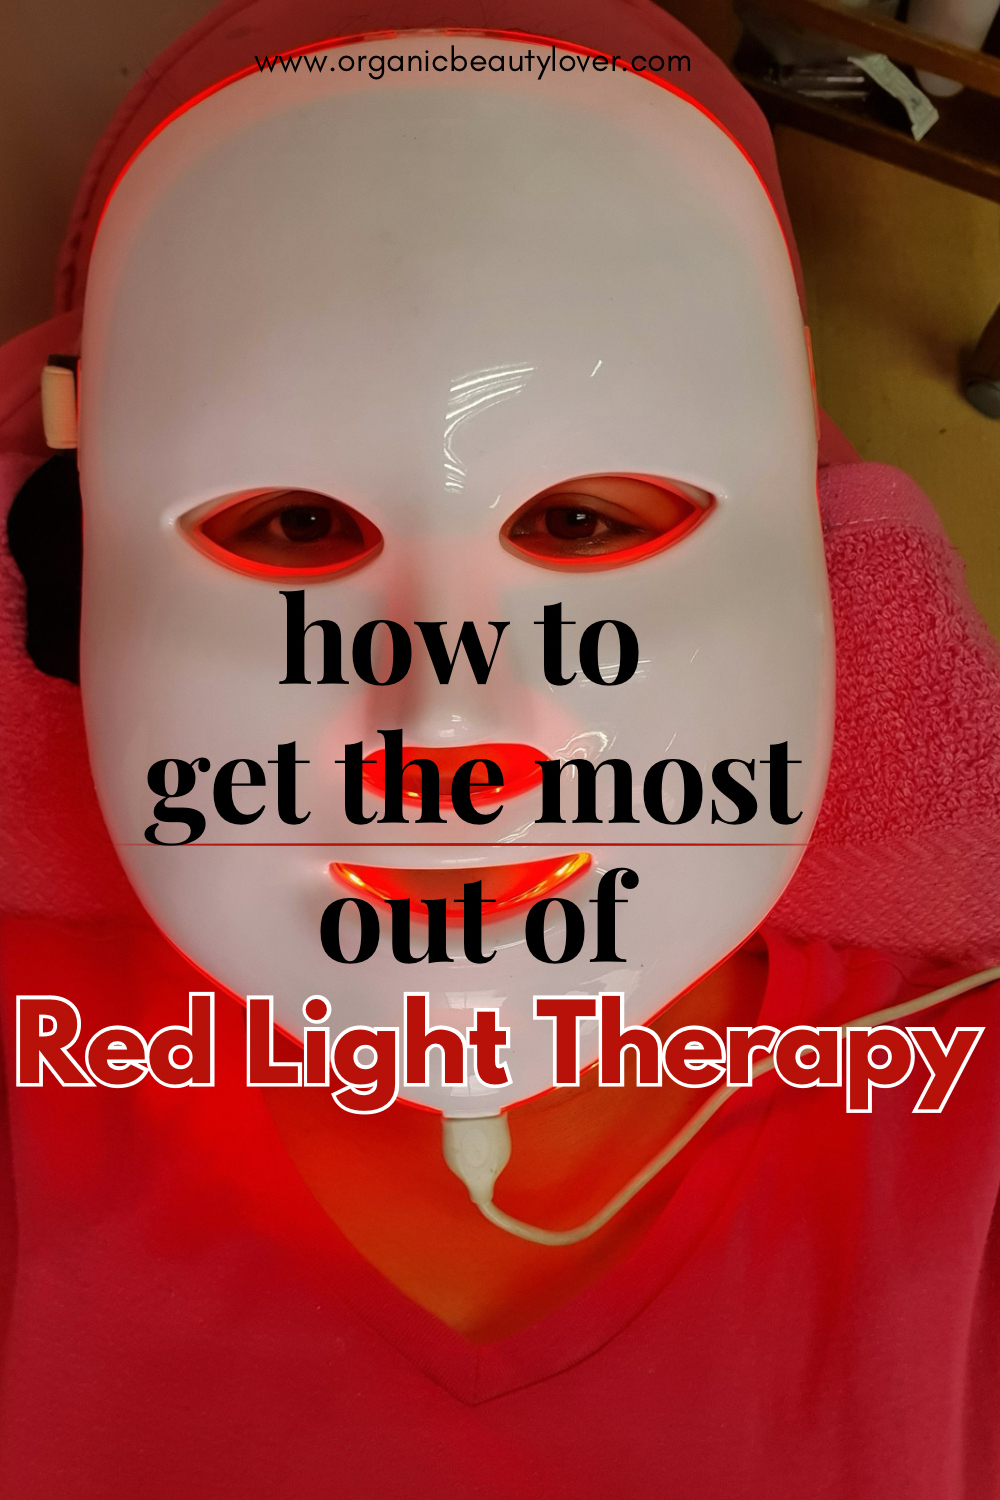 How to Maximize LED Red Light Therapy Benefits